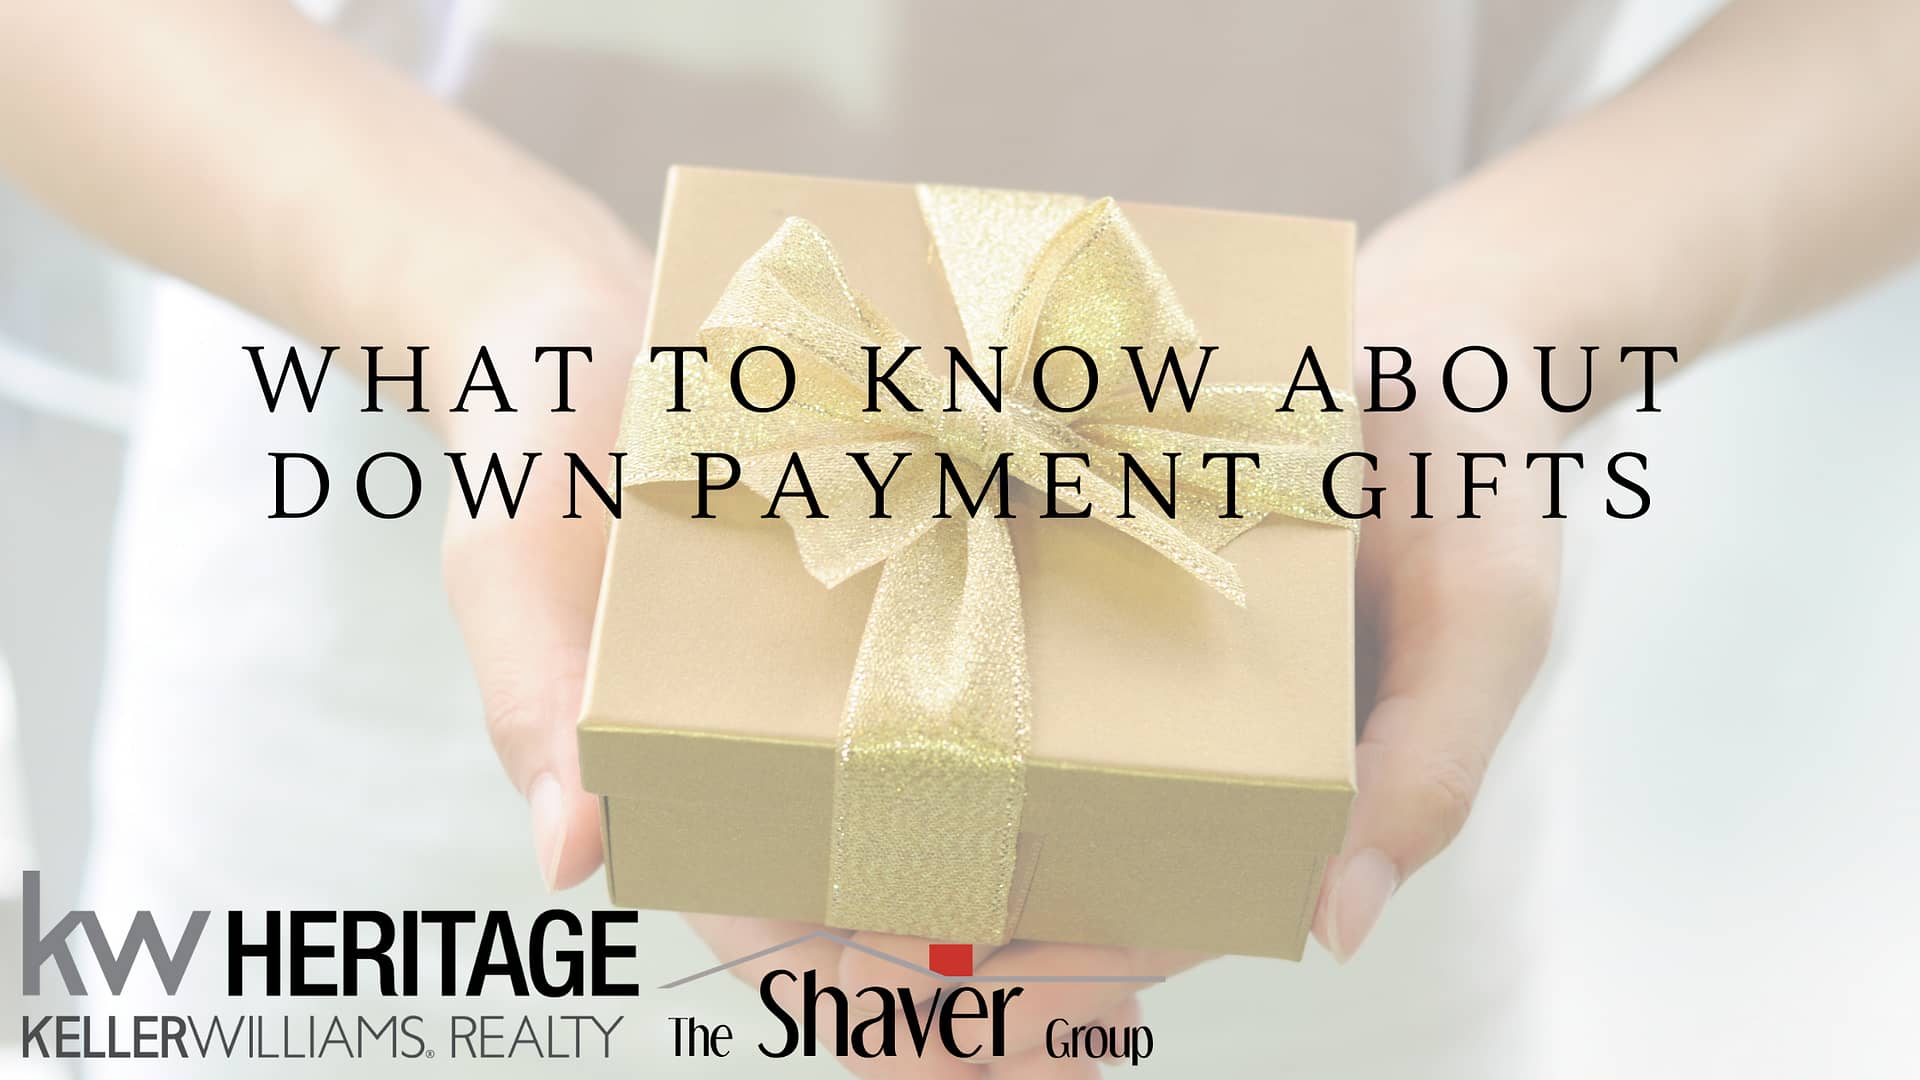 WHAT TO KNOW ABOUT DOWN PAYMENT GIFTS